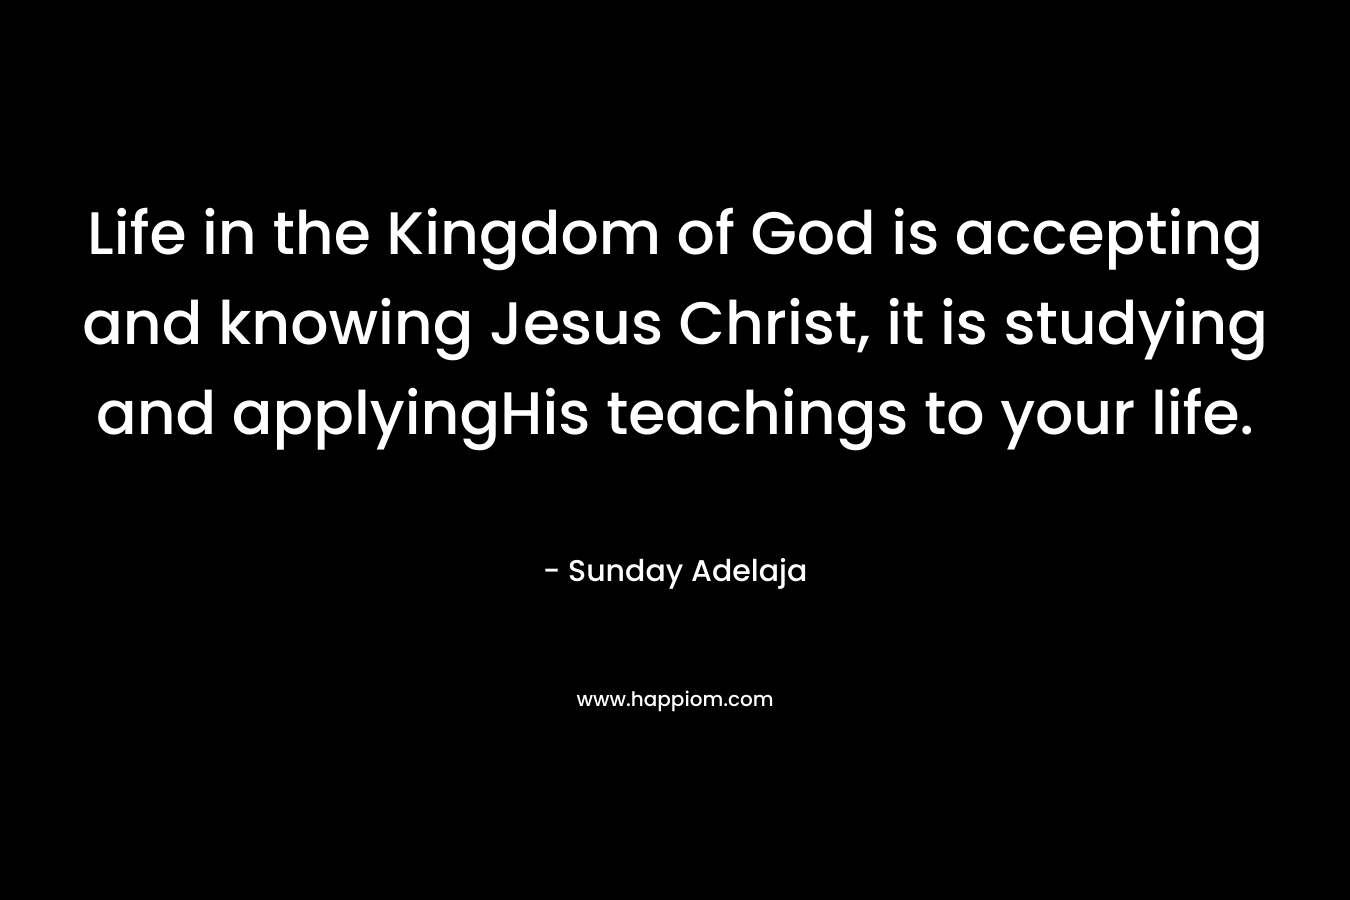 Life in the Kingdom of God is accepting and knowing Jesus Christ, it is studying and applyingHis teachings to your life.